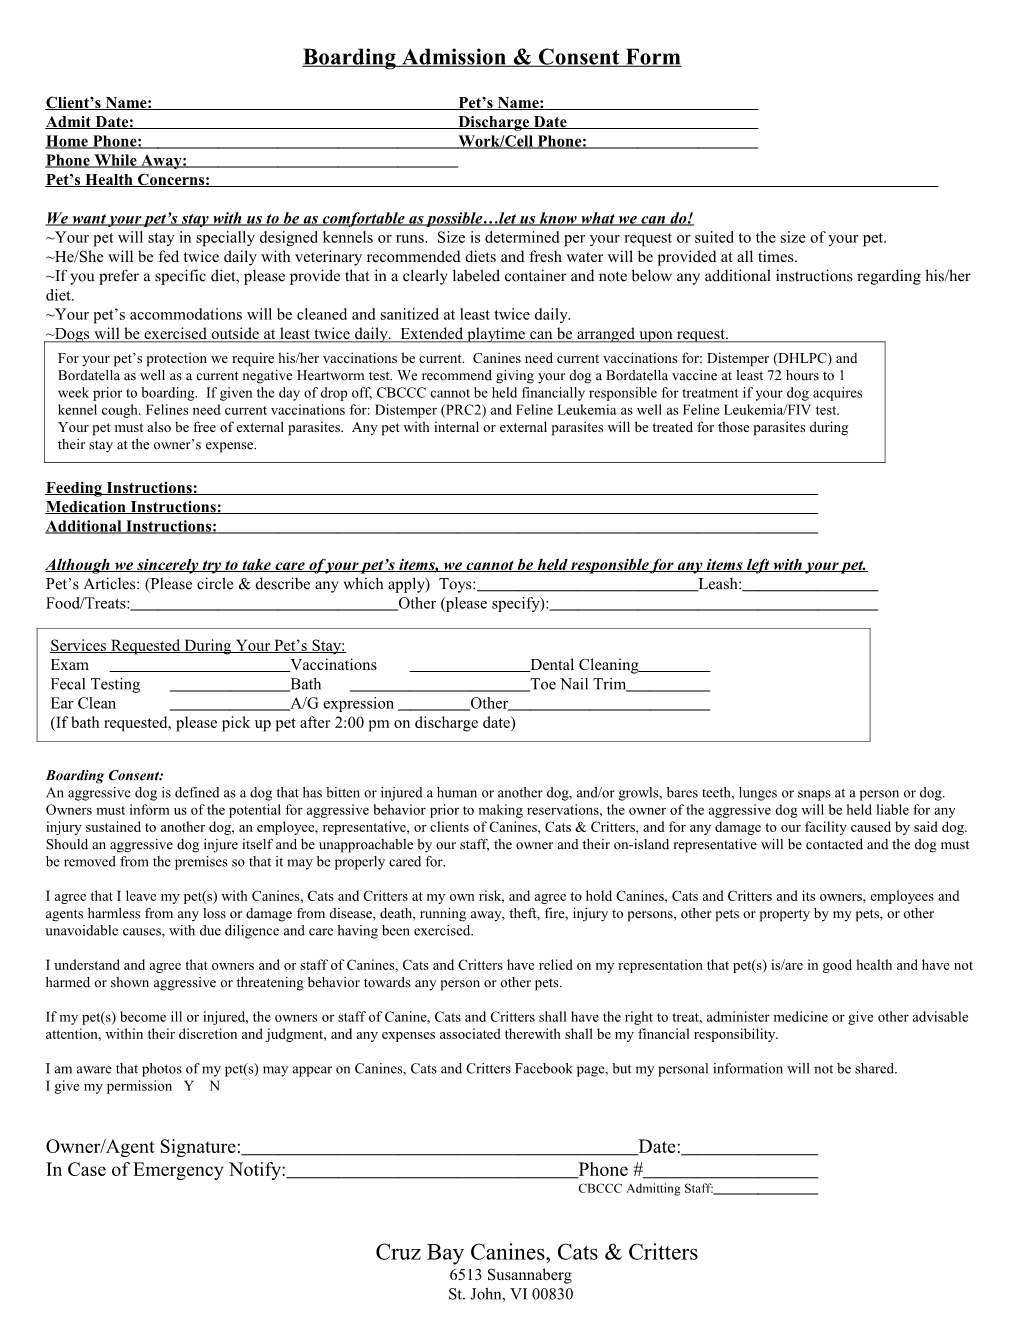 Boarding Admission & Consent Form